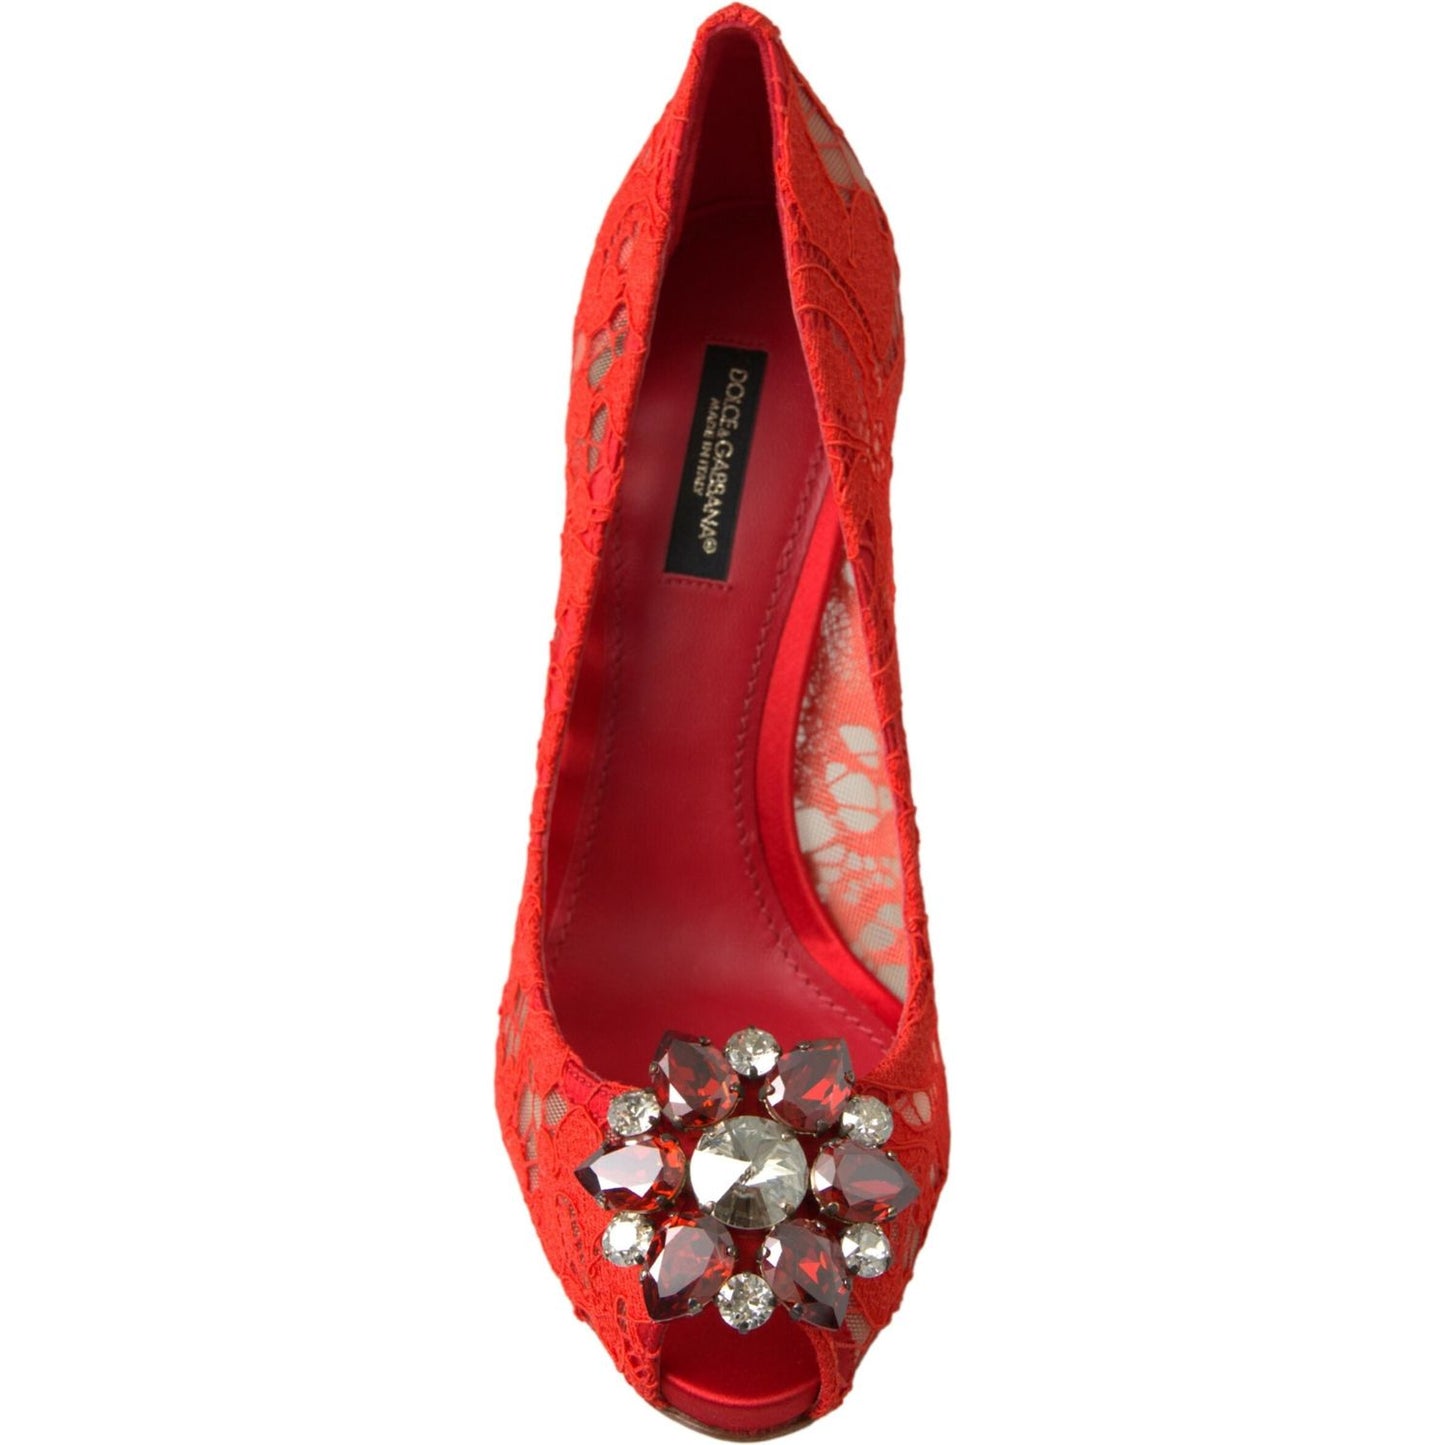 Dolce & Gabbana Chic Red Lace Heels with Crystal Embellishment red-taormina-lace-crystal-heels-pumps-shoes